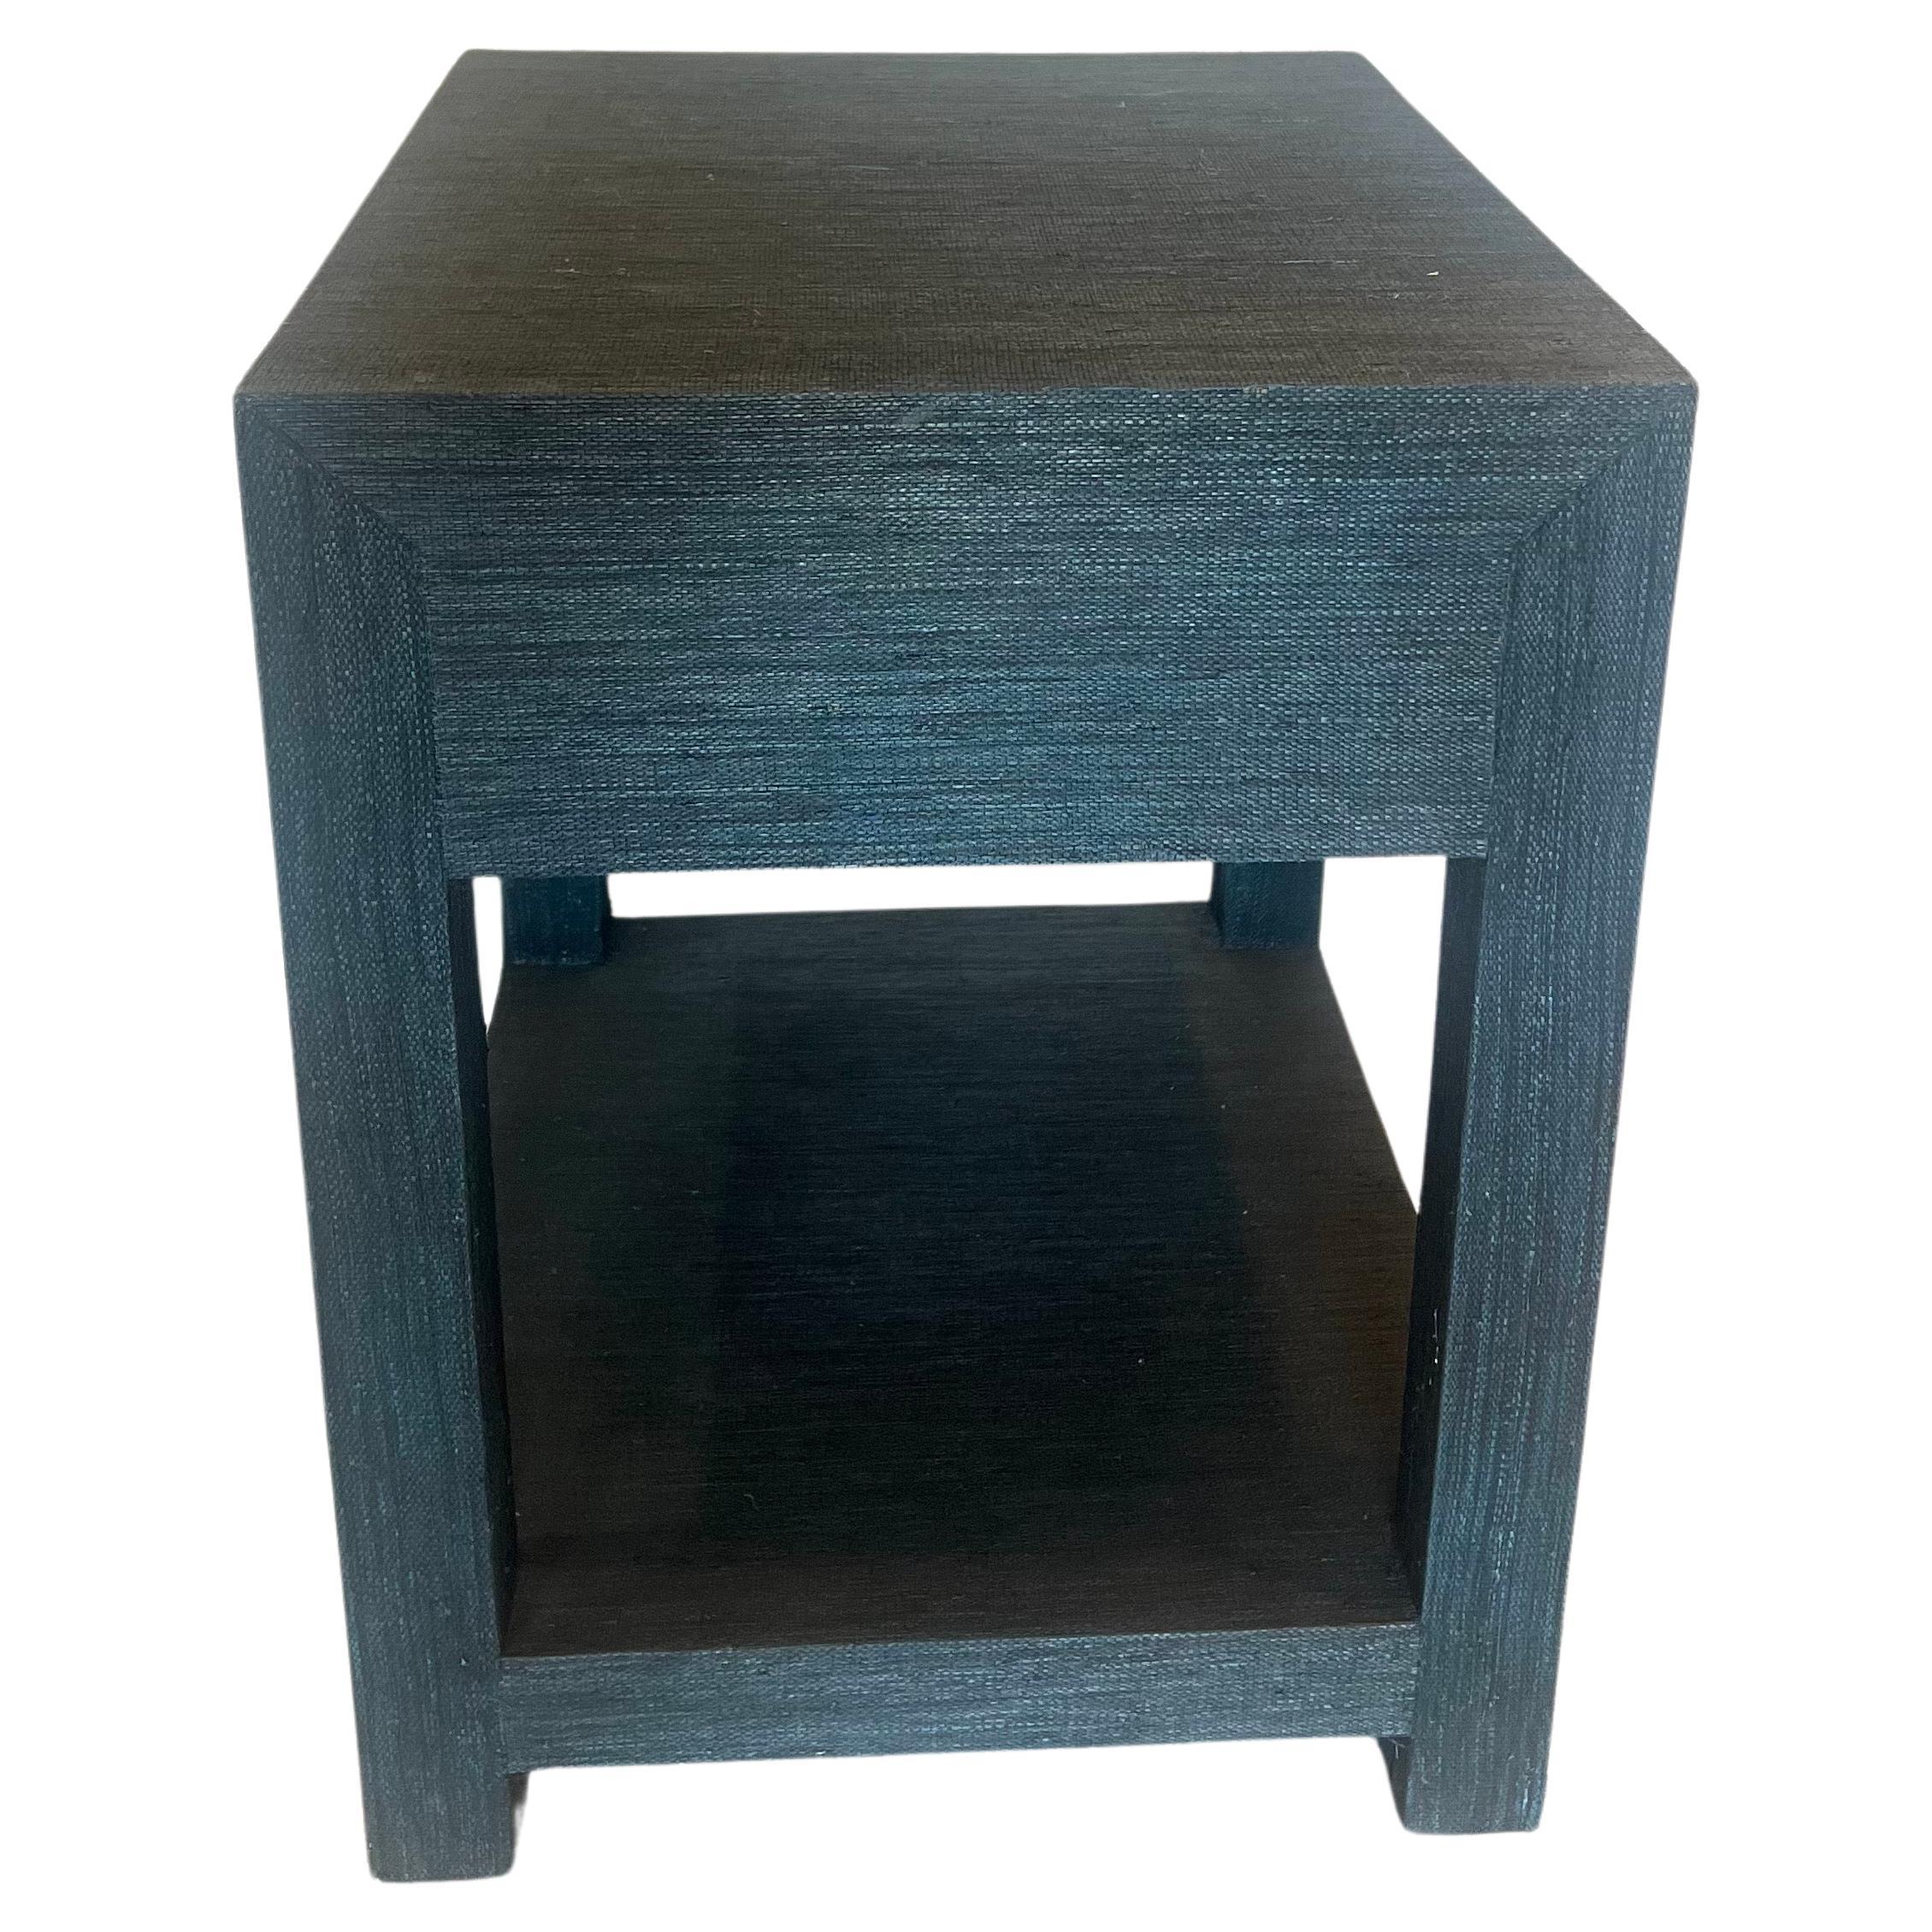 Hollywood Regency Contemporary Elegant Nightstand End Table in Linen by Serena & Lily For Sale